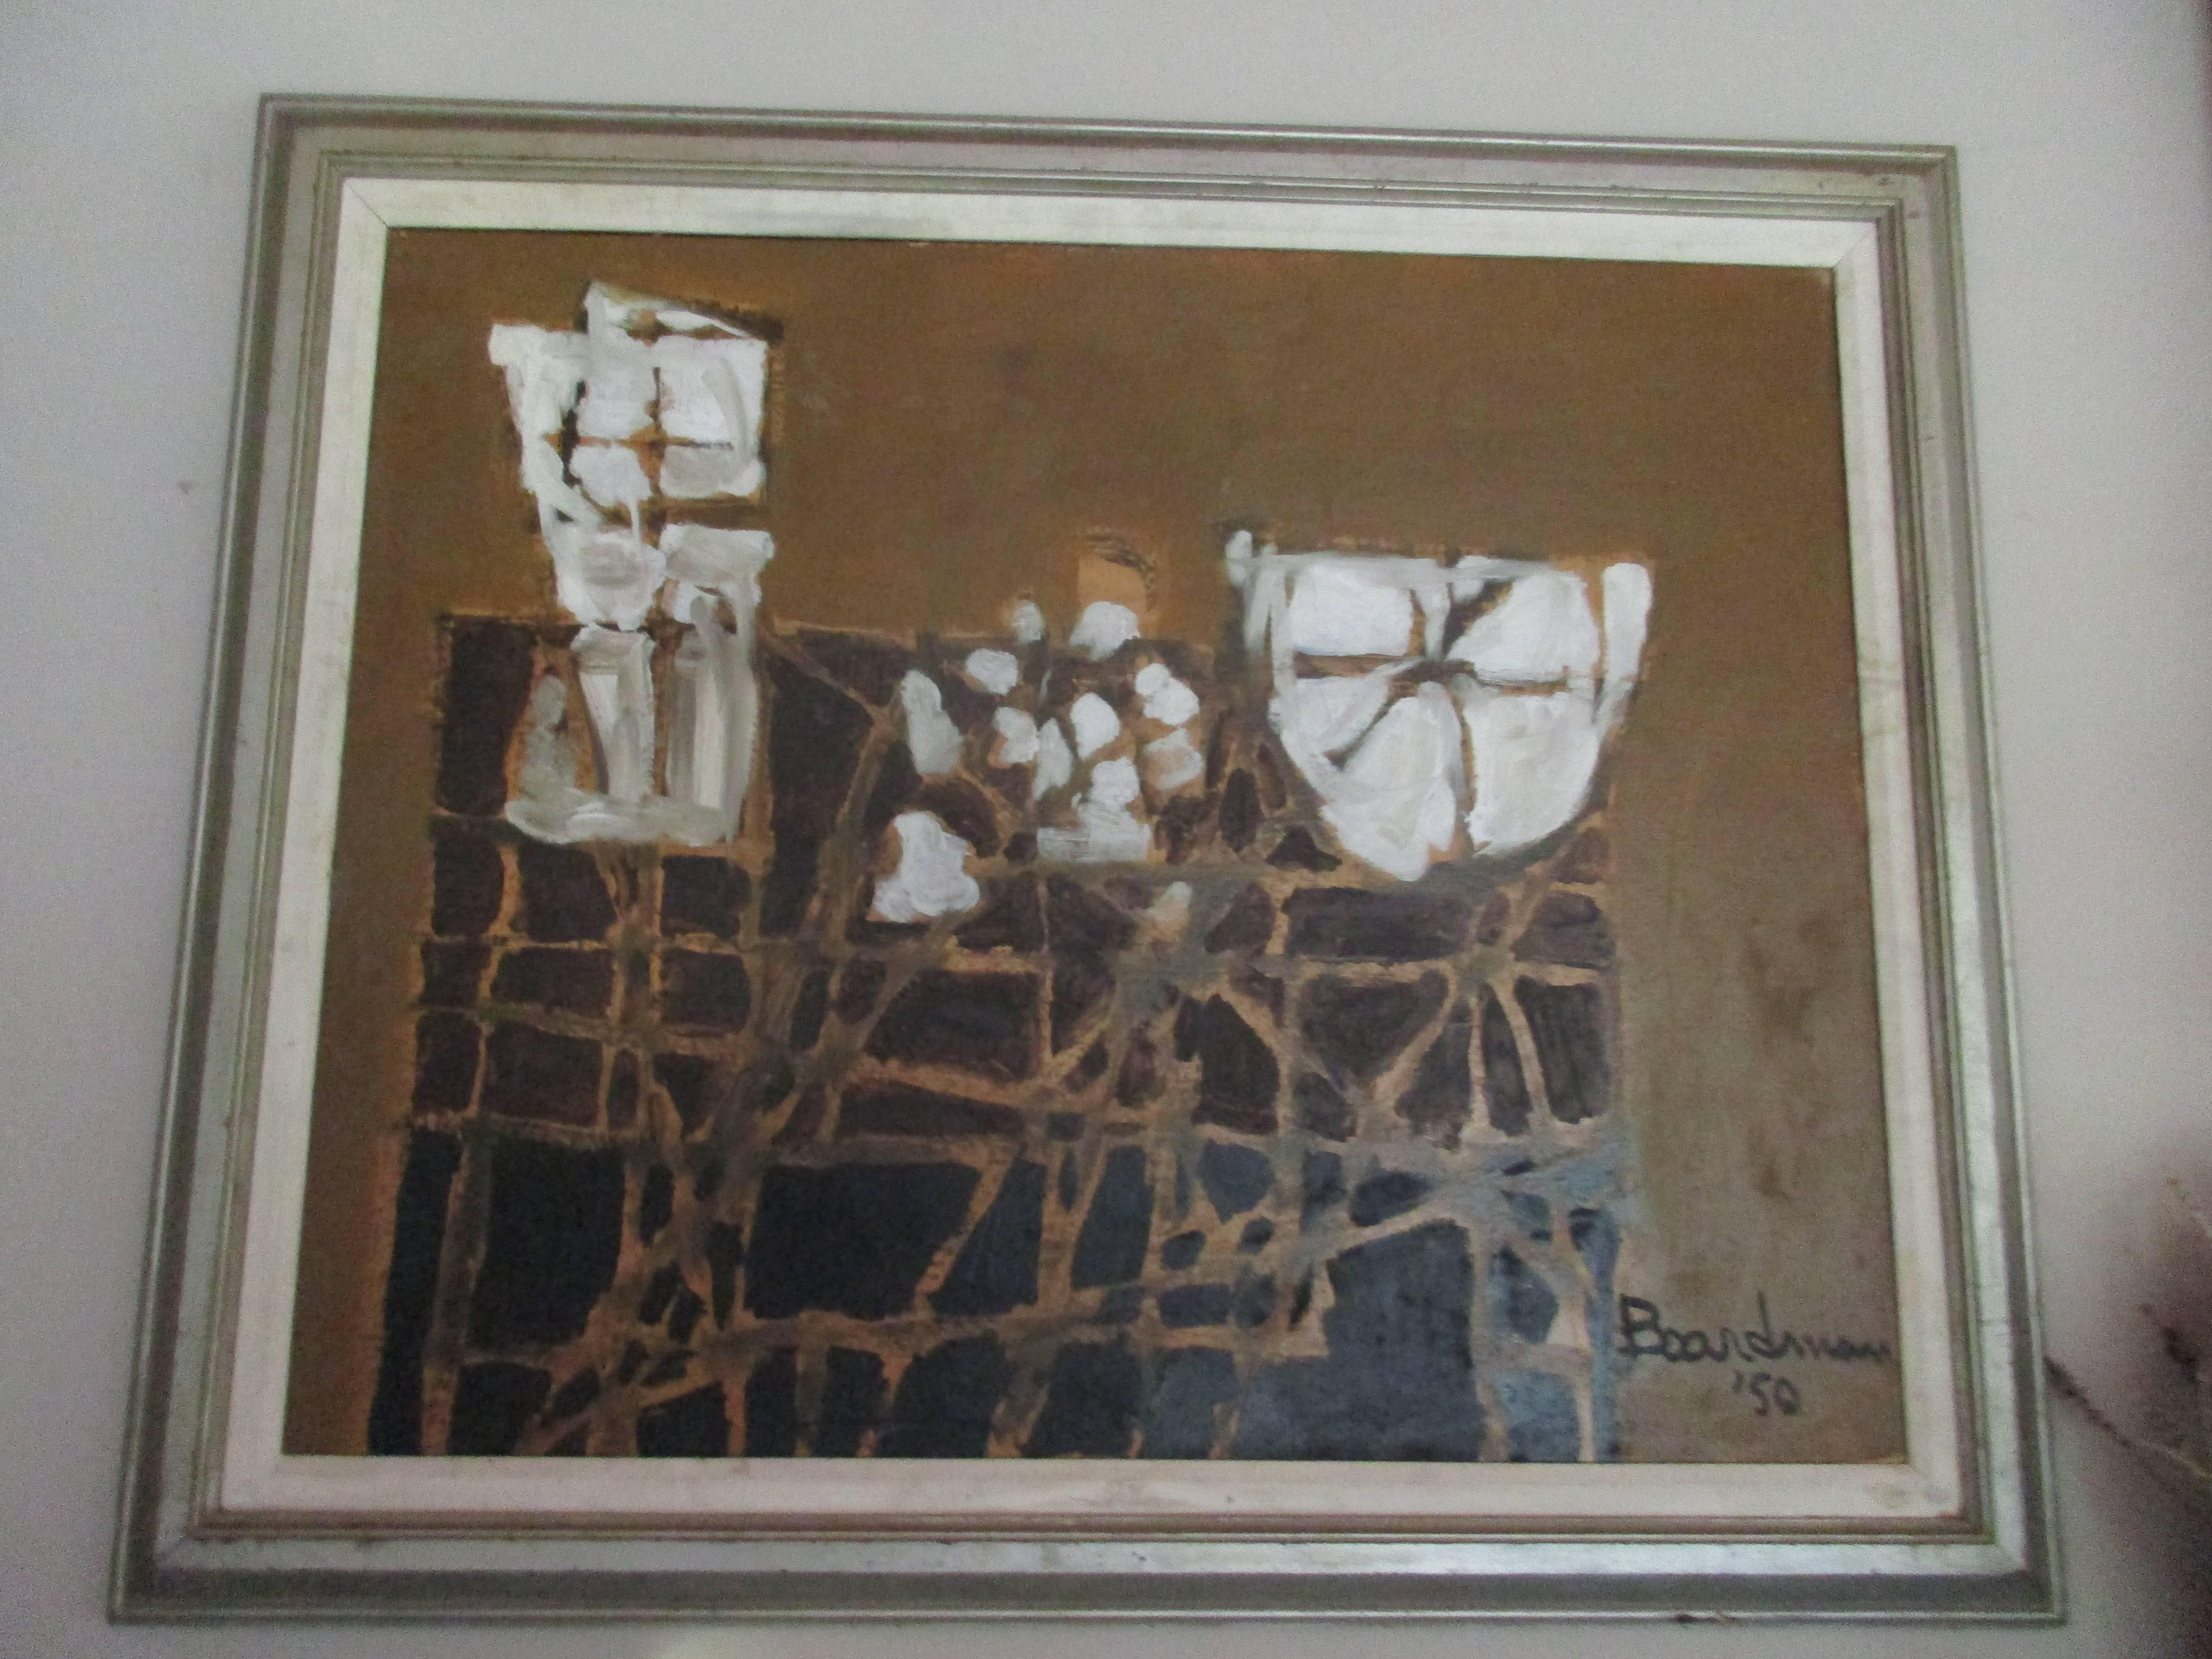 Midcentury semi-abstract oil on canvas painting dated '50, signed Boardman in a wood frame of the period